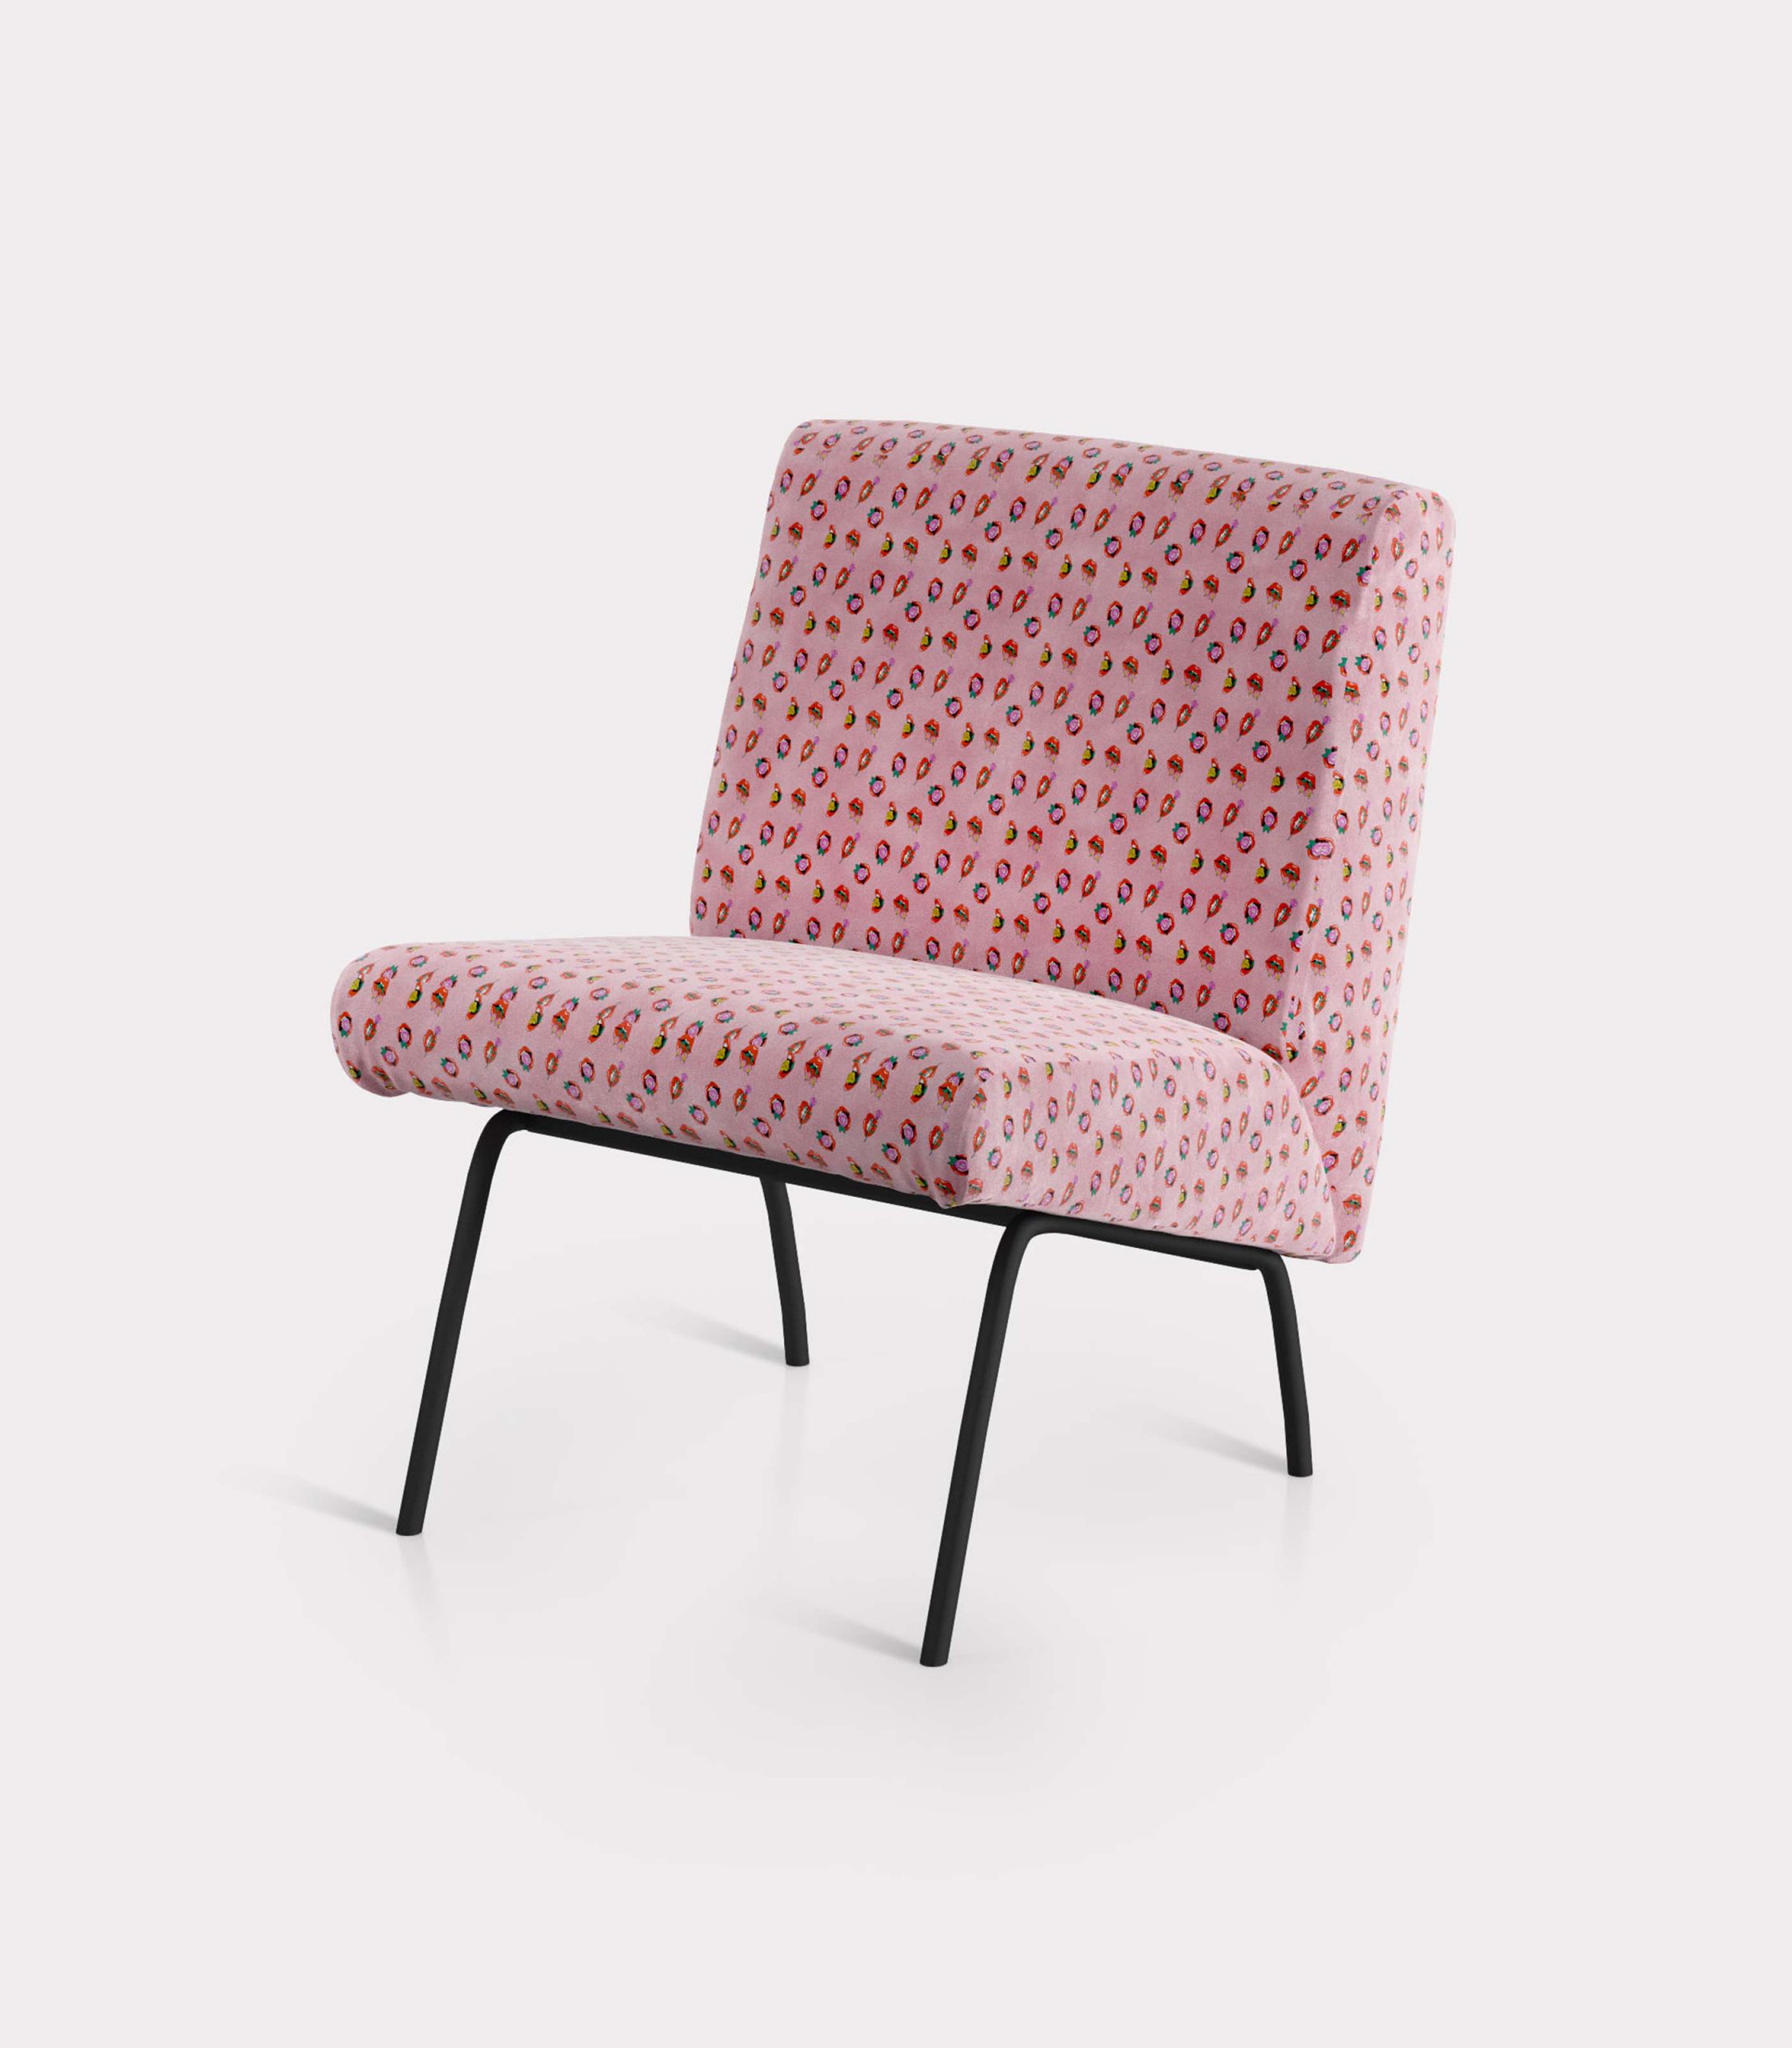 Armchair with "Mouths and flowers" pattern loopo milan design FD